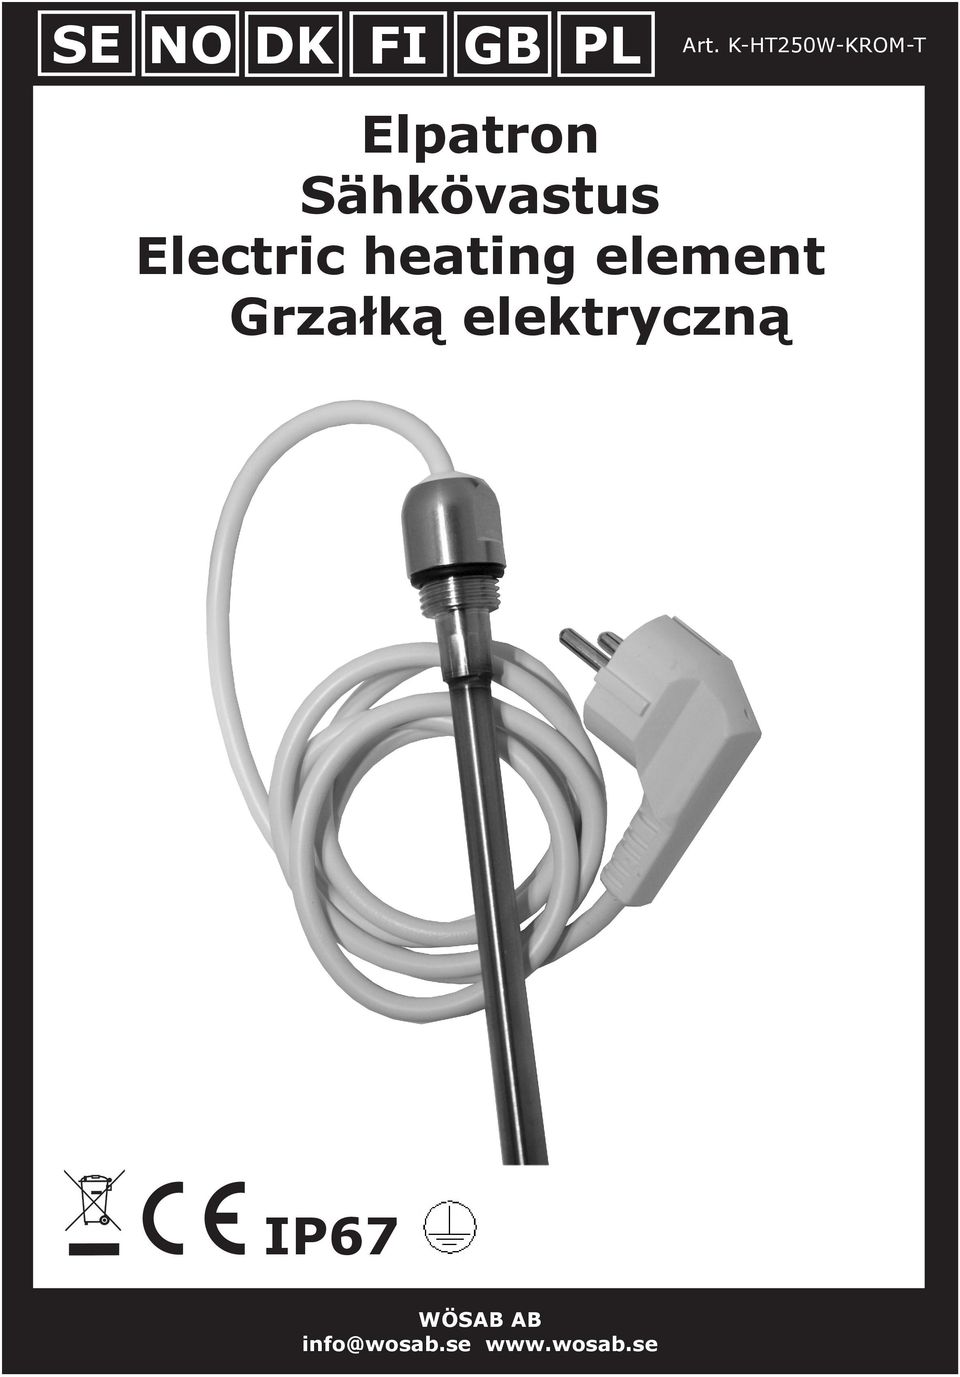 Electric heating